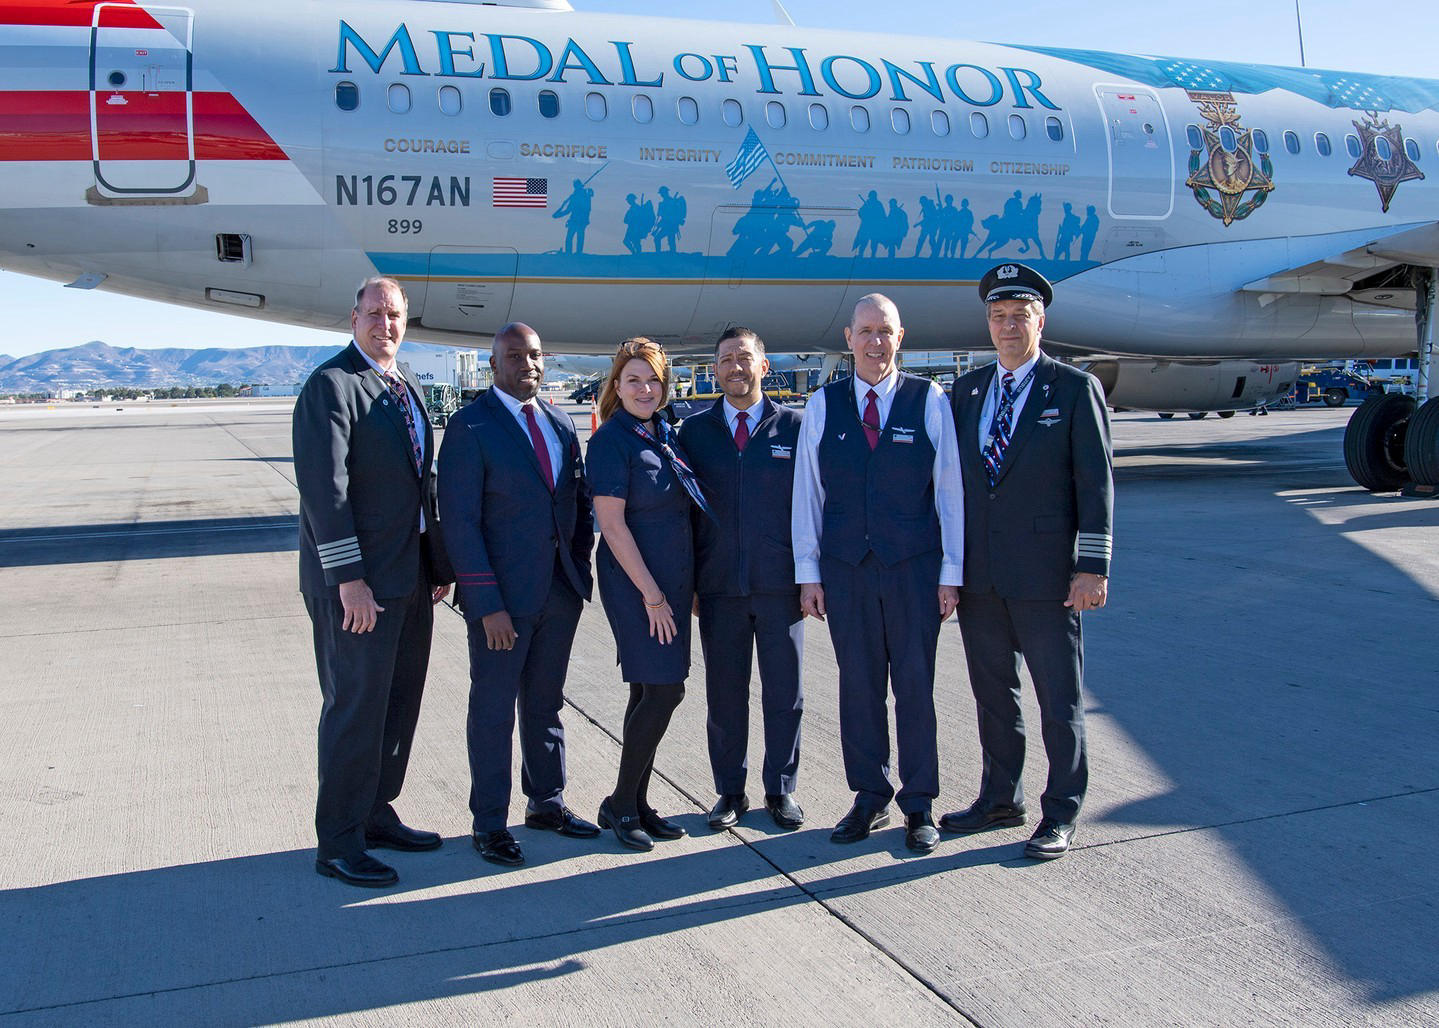 image  1 American Airlines - Supporting the military community and honoring our nation’s heroes is engrained